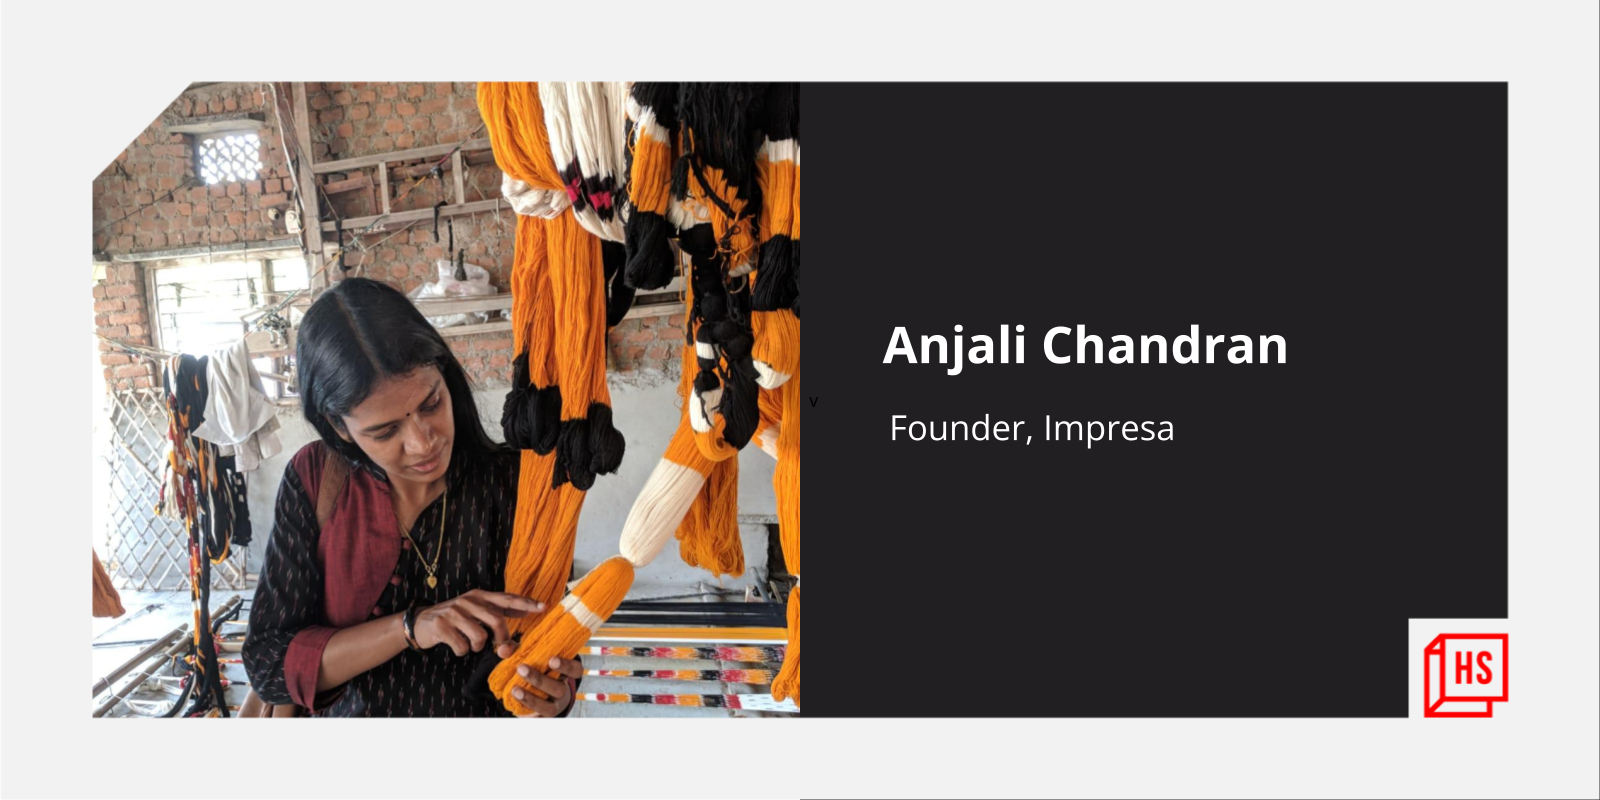 This ex-techie-turned-social entrepreneur is on a mission to save a dying handloom village